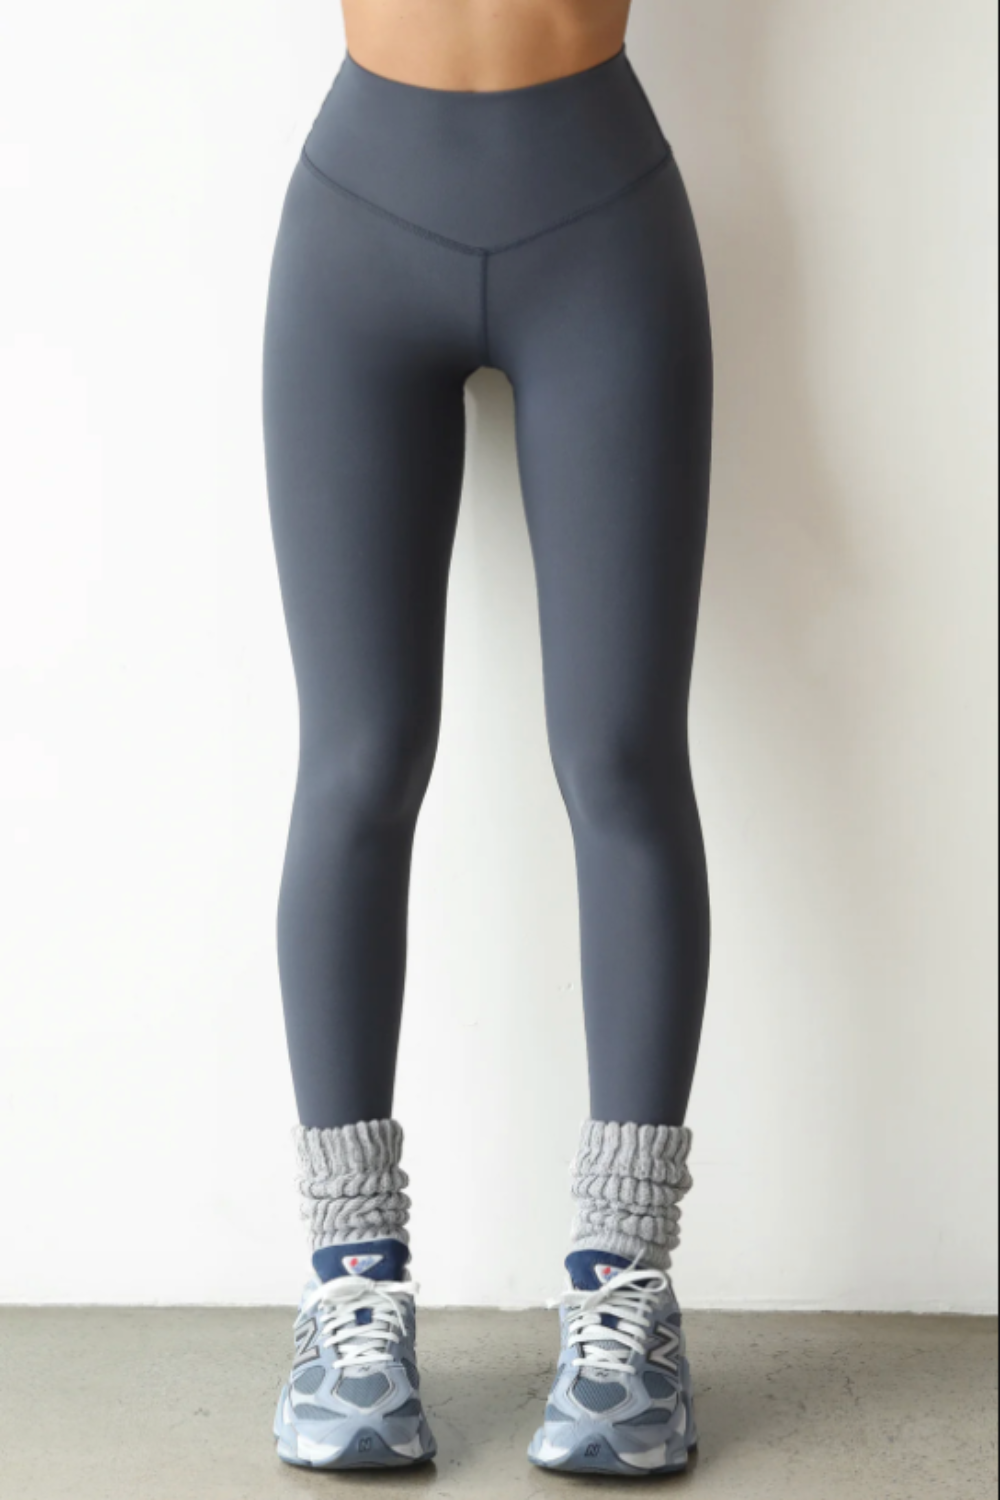 Second Skin Legging in Sueded Navy – Research and Design